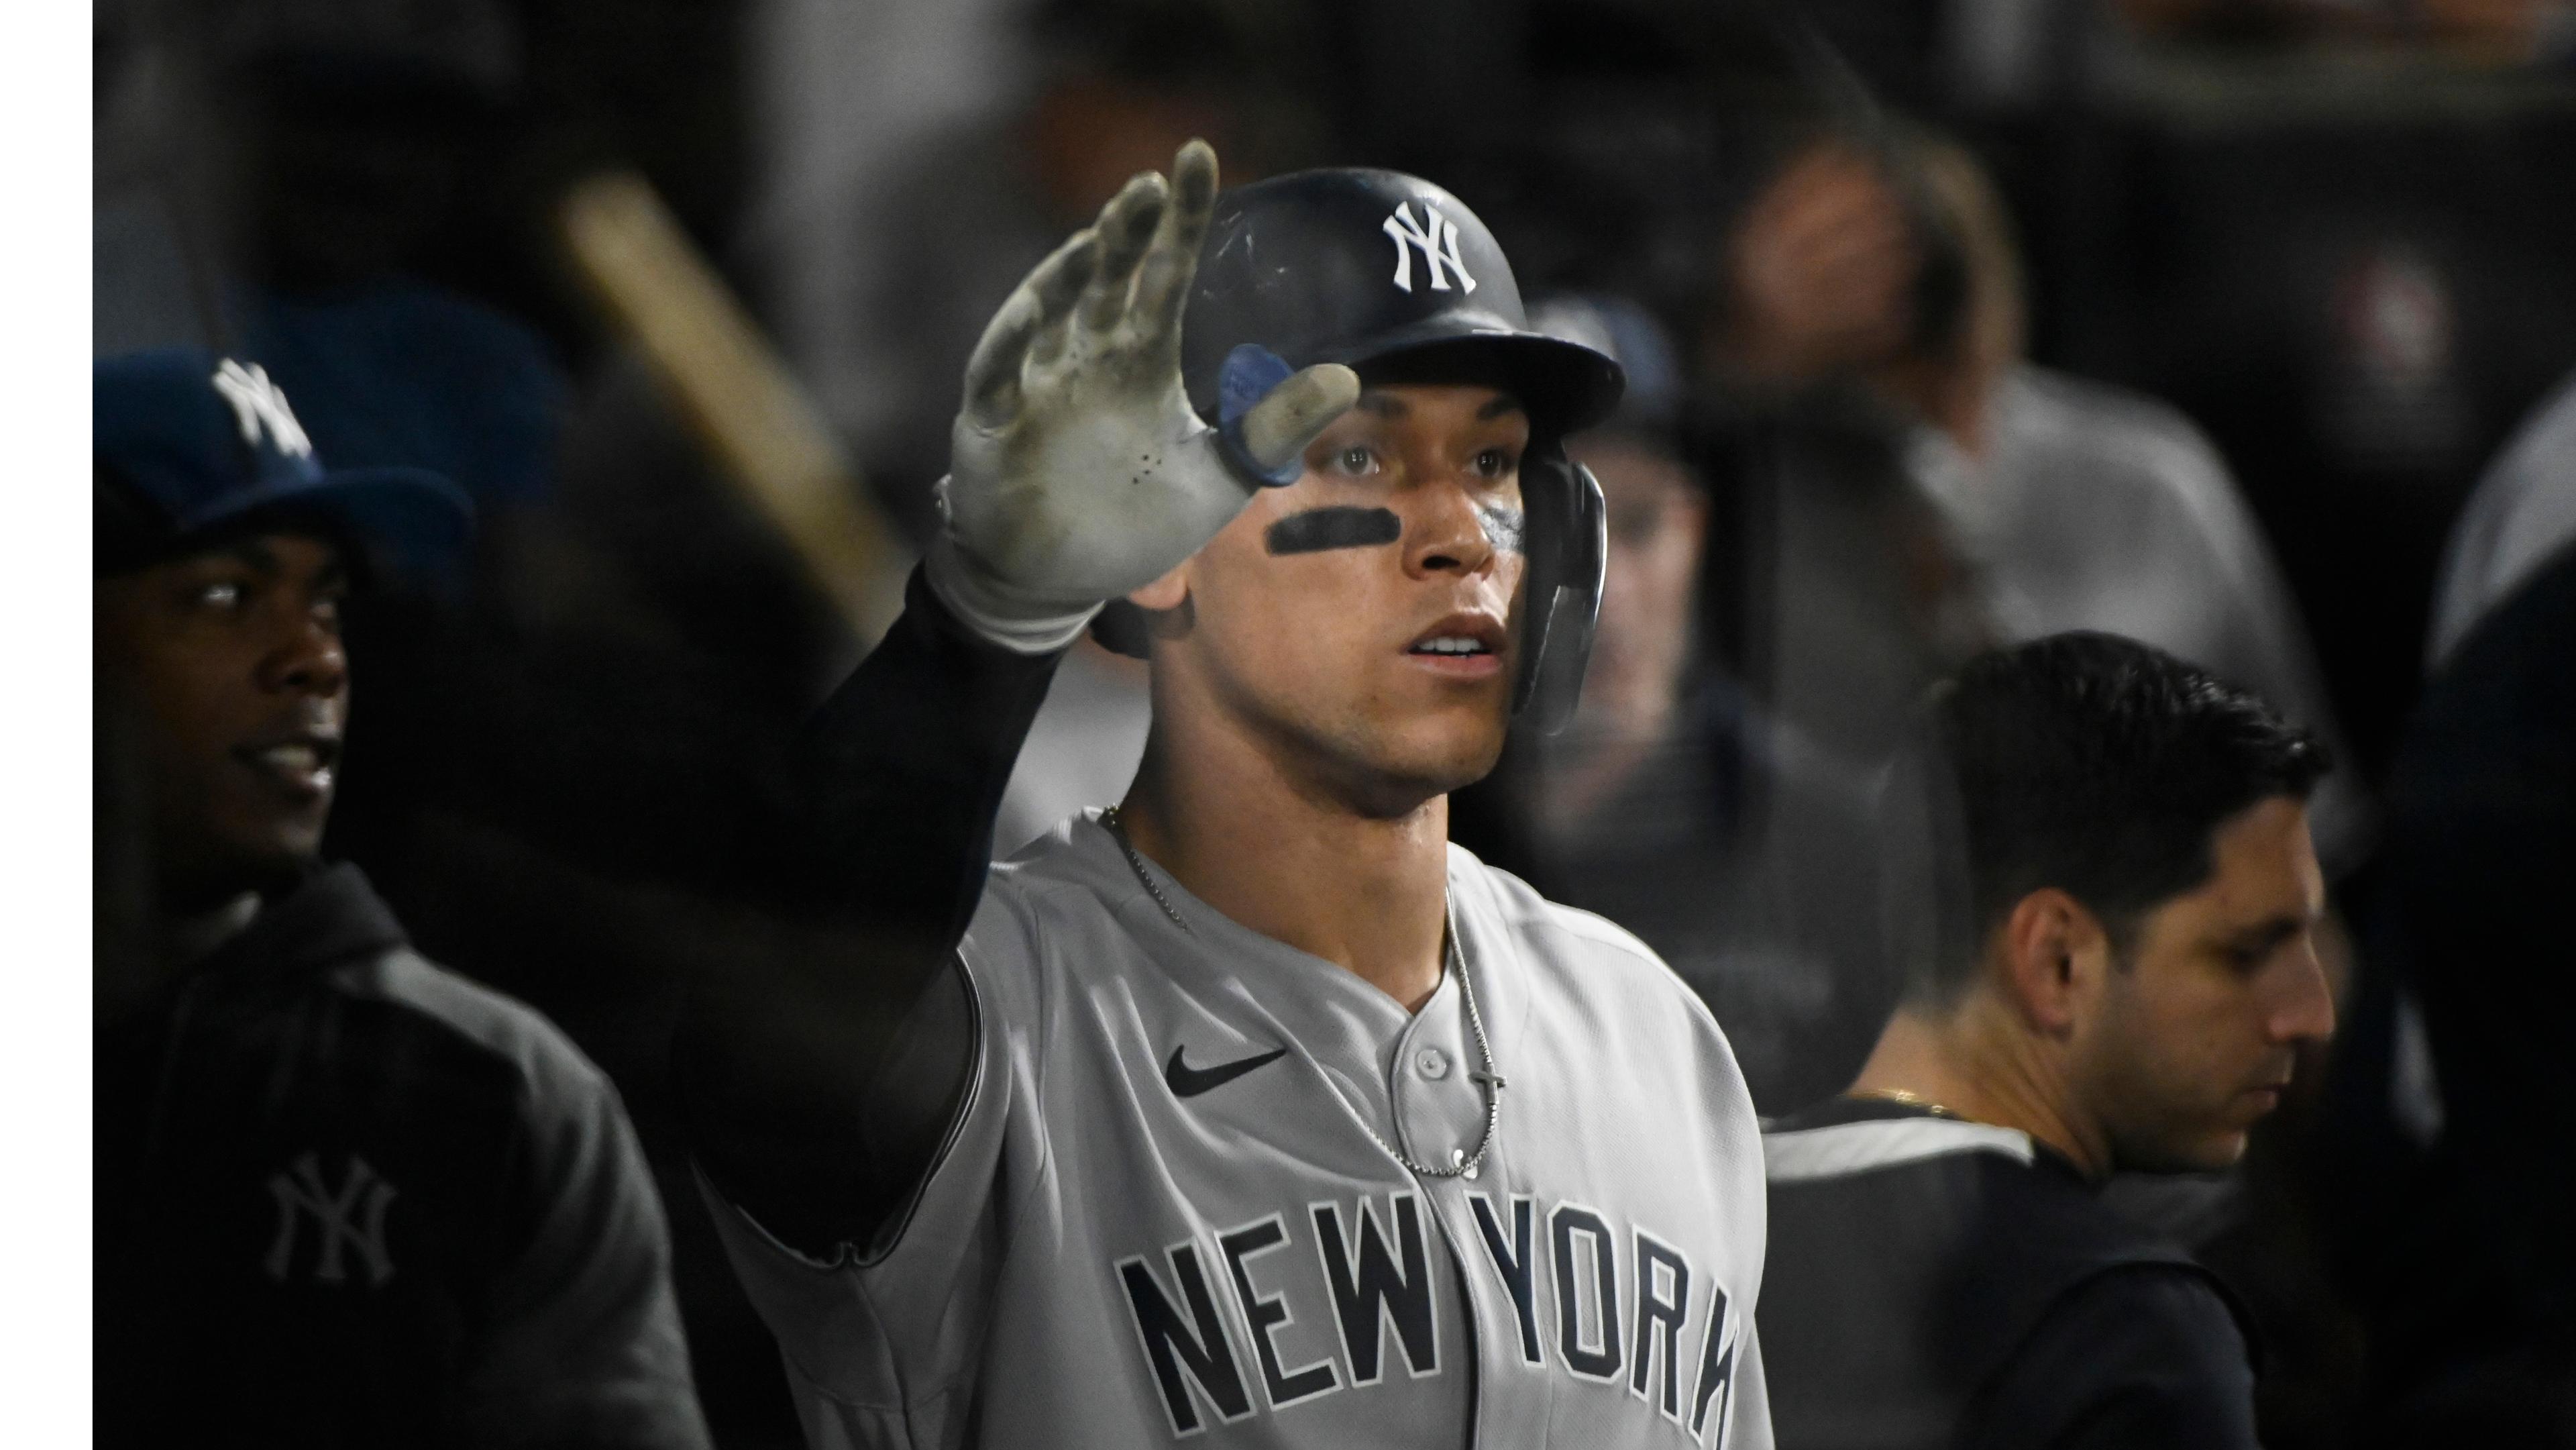 New York Yankees right fielder Aaron Judge (99) in the dugout after he hits a home run during the eighth inning against the Chicago White Sox at Guaranteed Rate Field. / Matt Marton - USA TODAY Sports